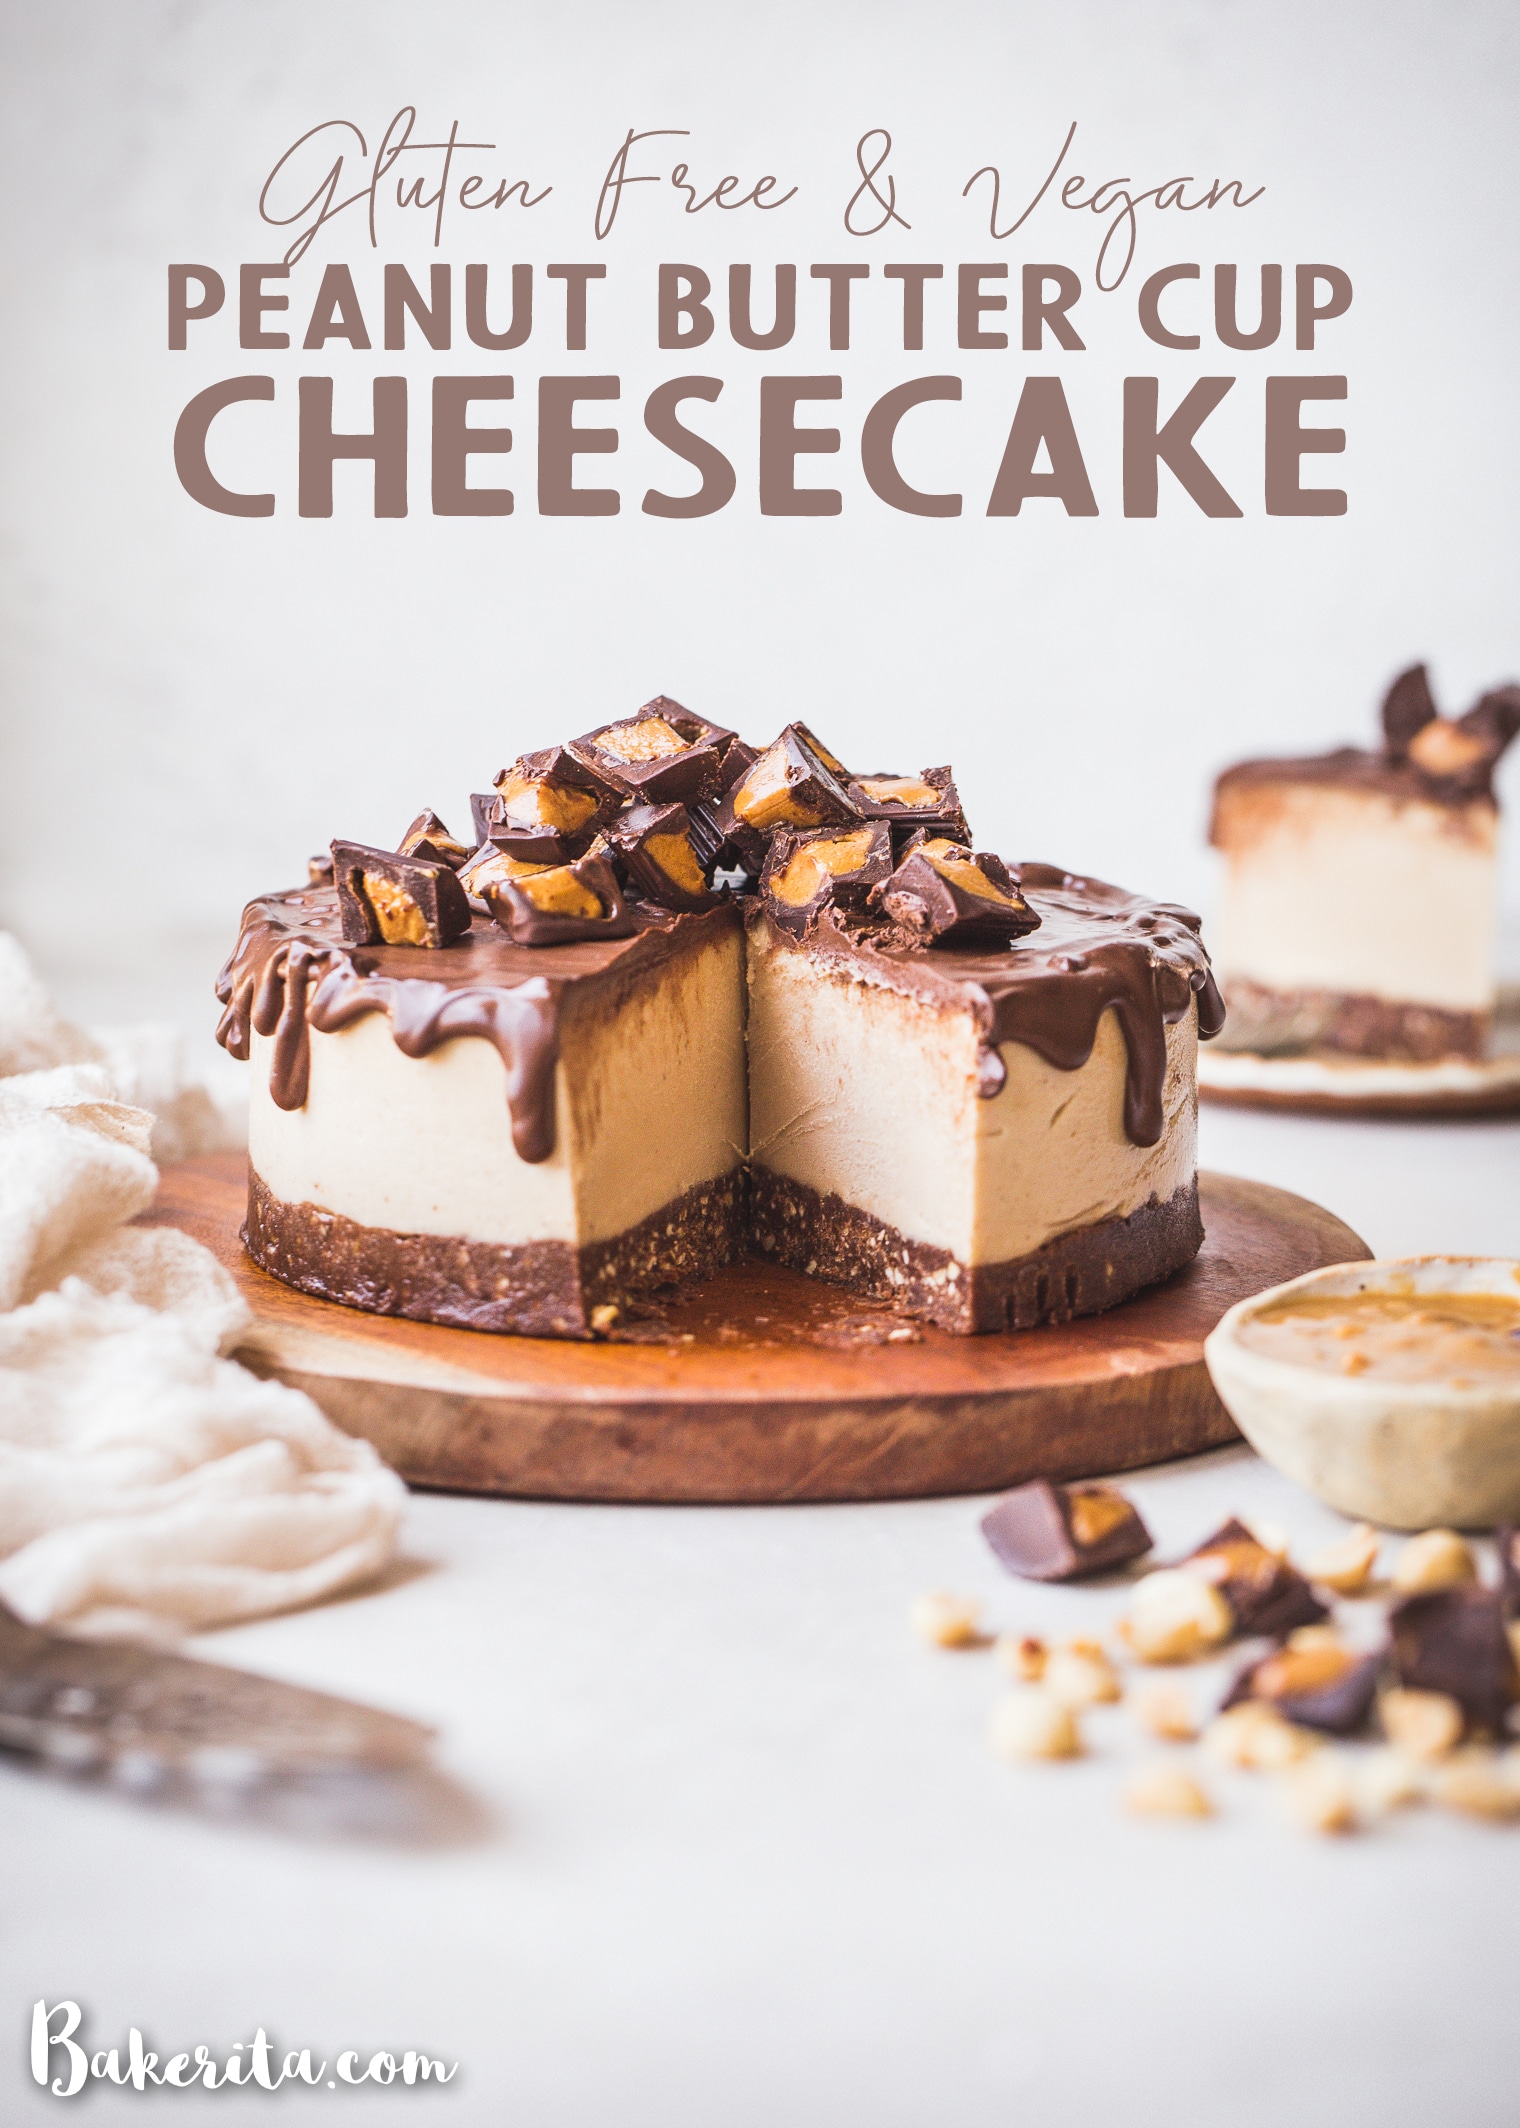 This Gluten-Free Vegan Peanut Butter Cup Cheesecake tastes like your favorite candy turned into a delightfully creamy vegan cheesecake. With a chocolate crust, creamy peanut butter filling, and chocolate ganache topping, you won't be able to have just one bite!